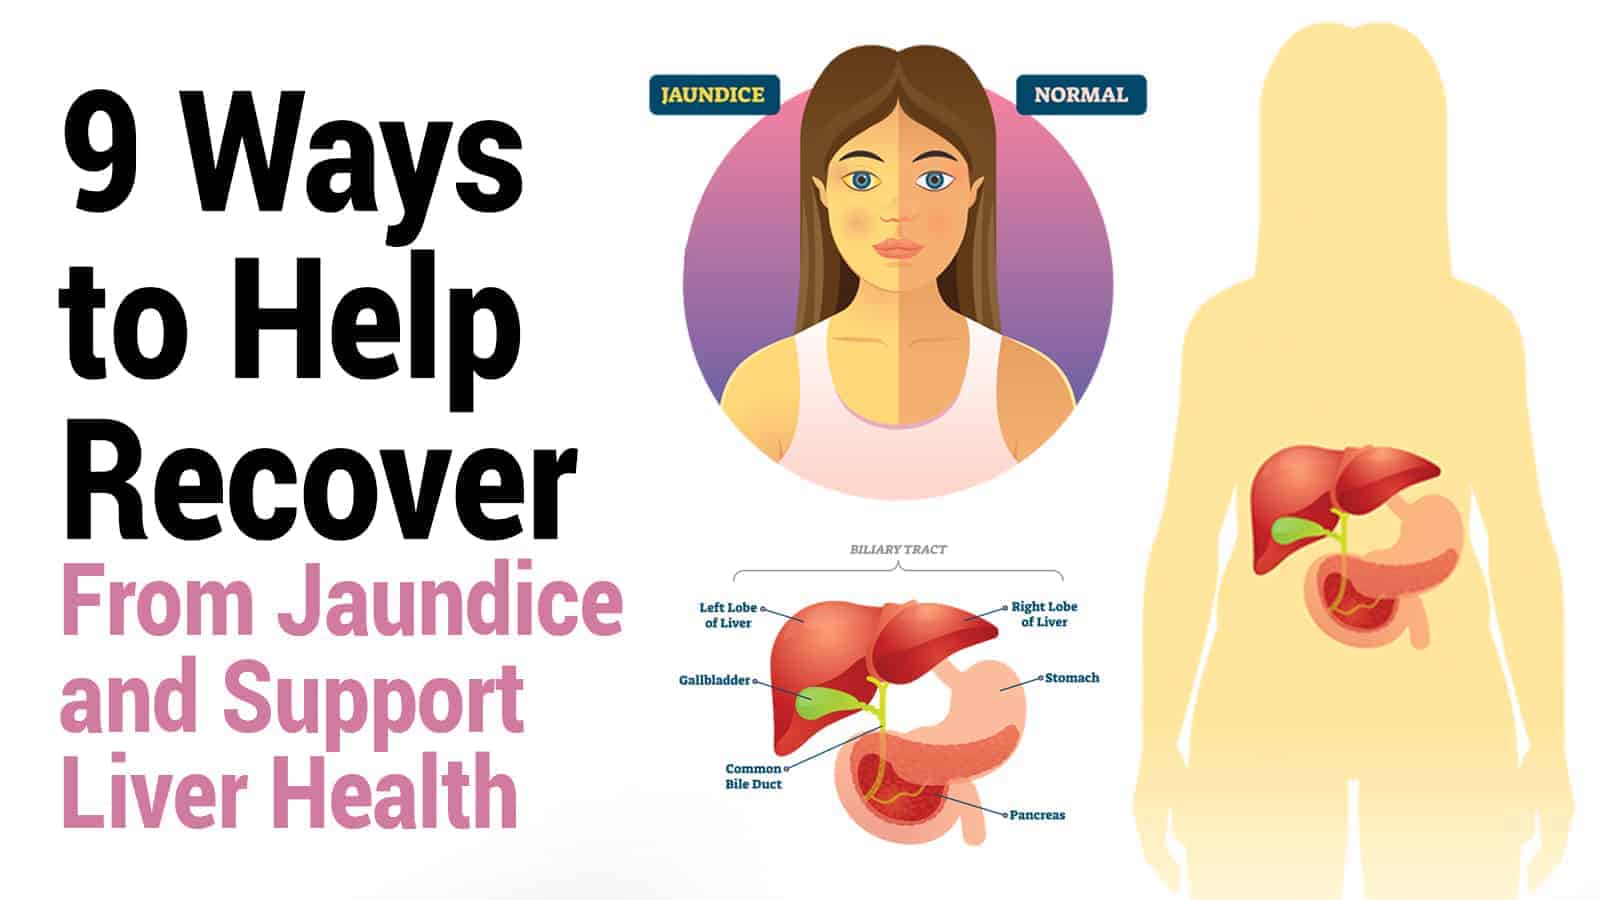 9 Ways to Help Recover From Jaundice and Support Liver Health